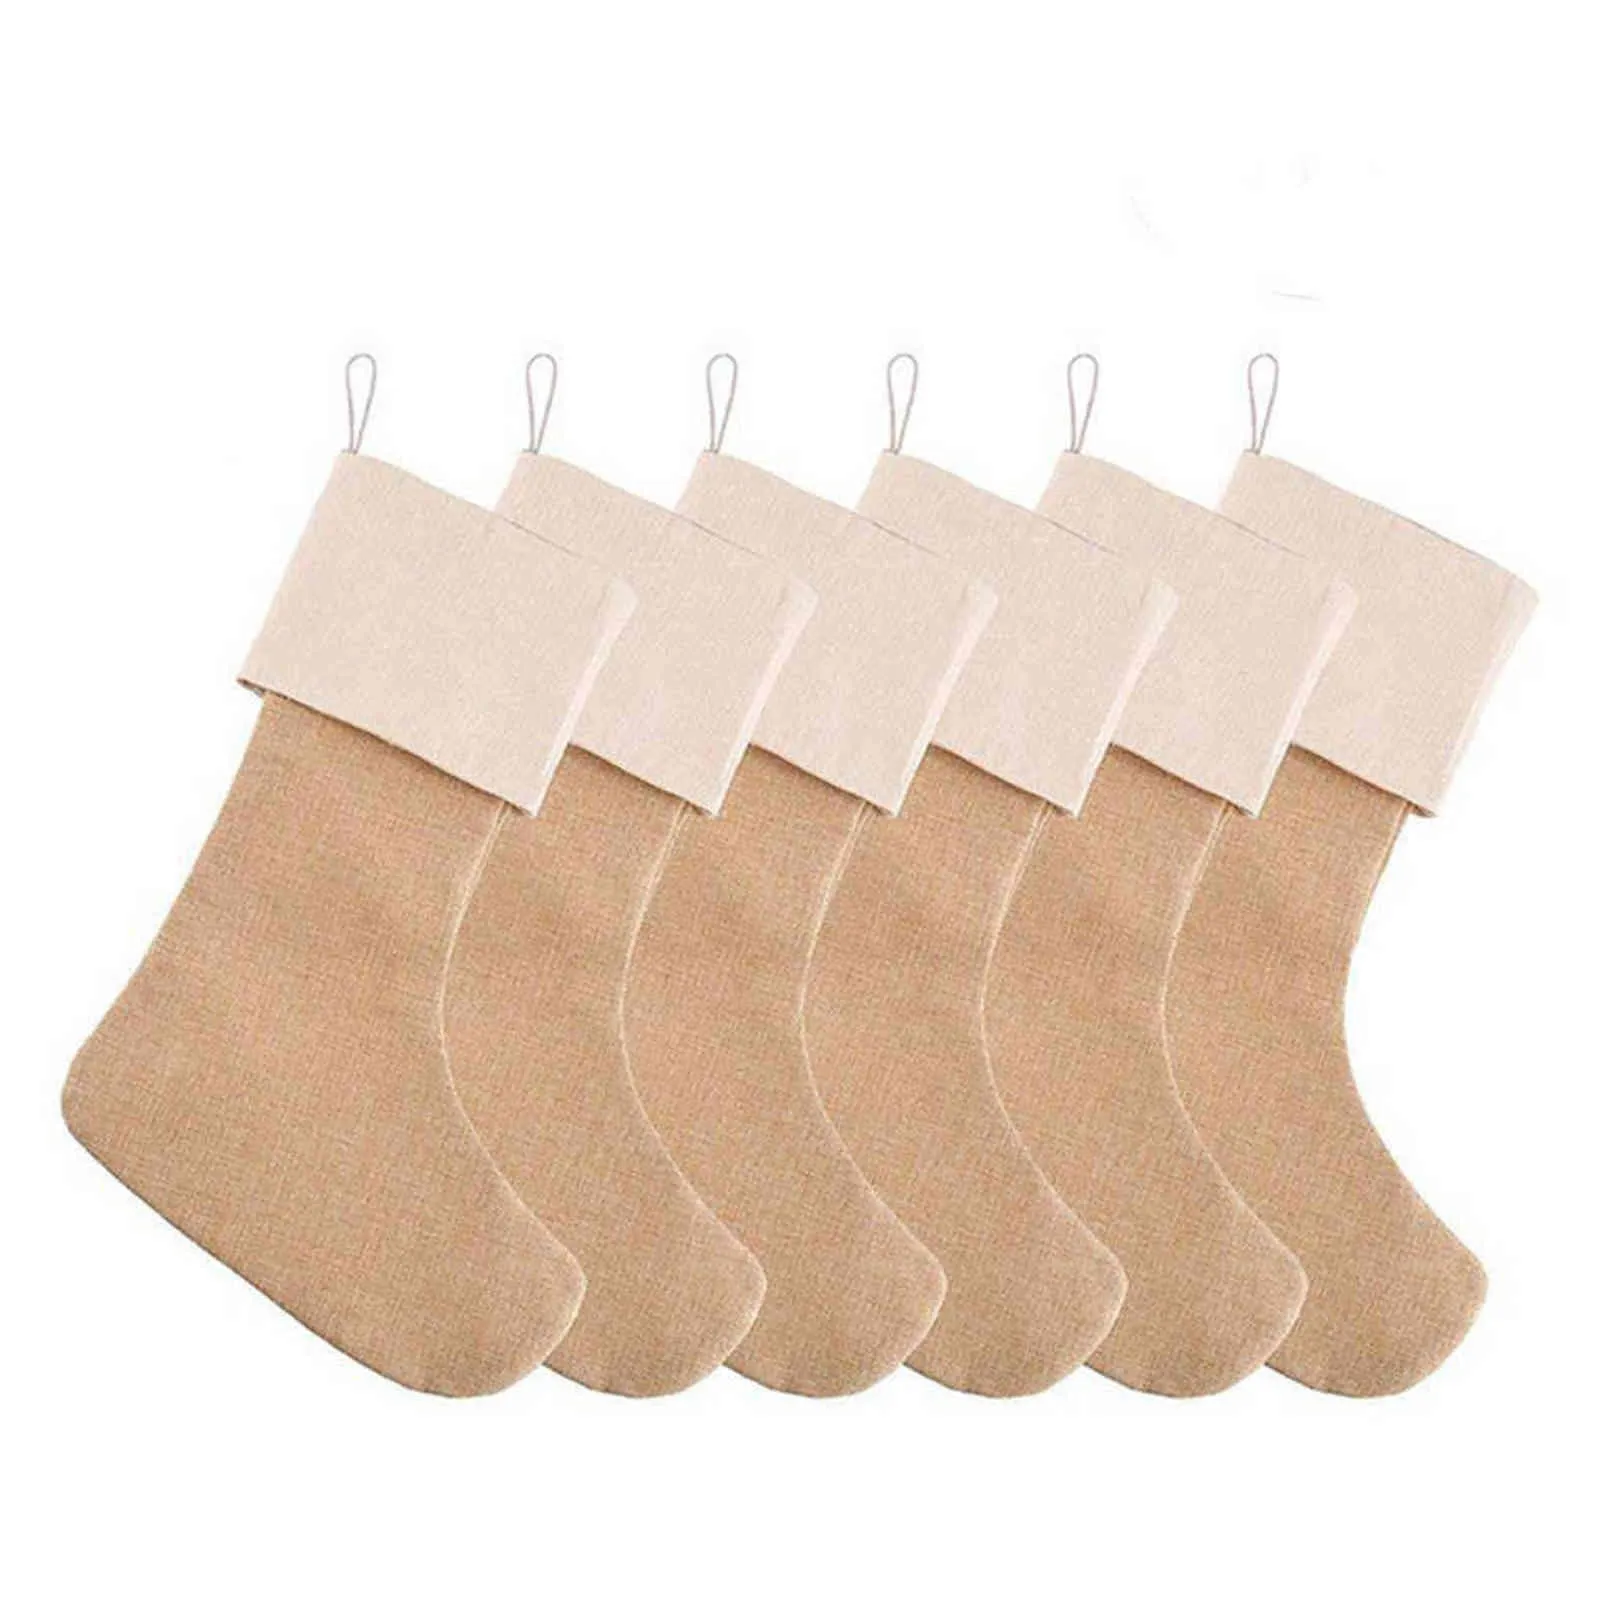 6pcs Christmas Stockings Socks Gift Candy Bag Decorations for Home New Year Xmas Tree Diy Hanging Ornament